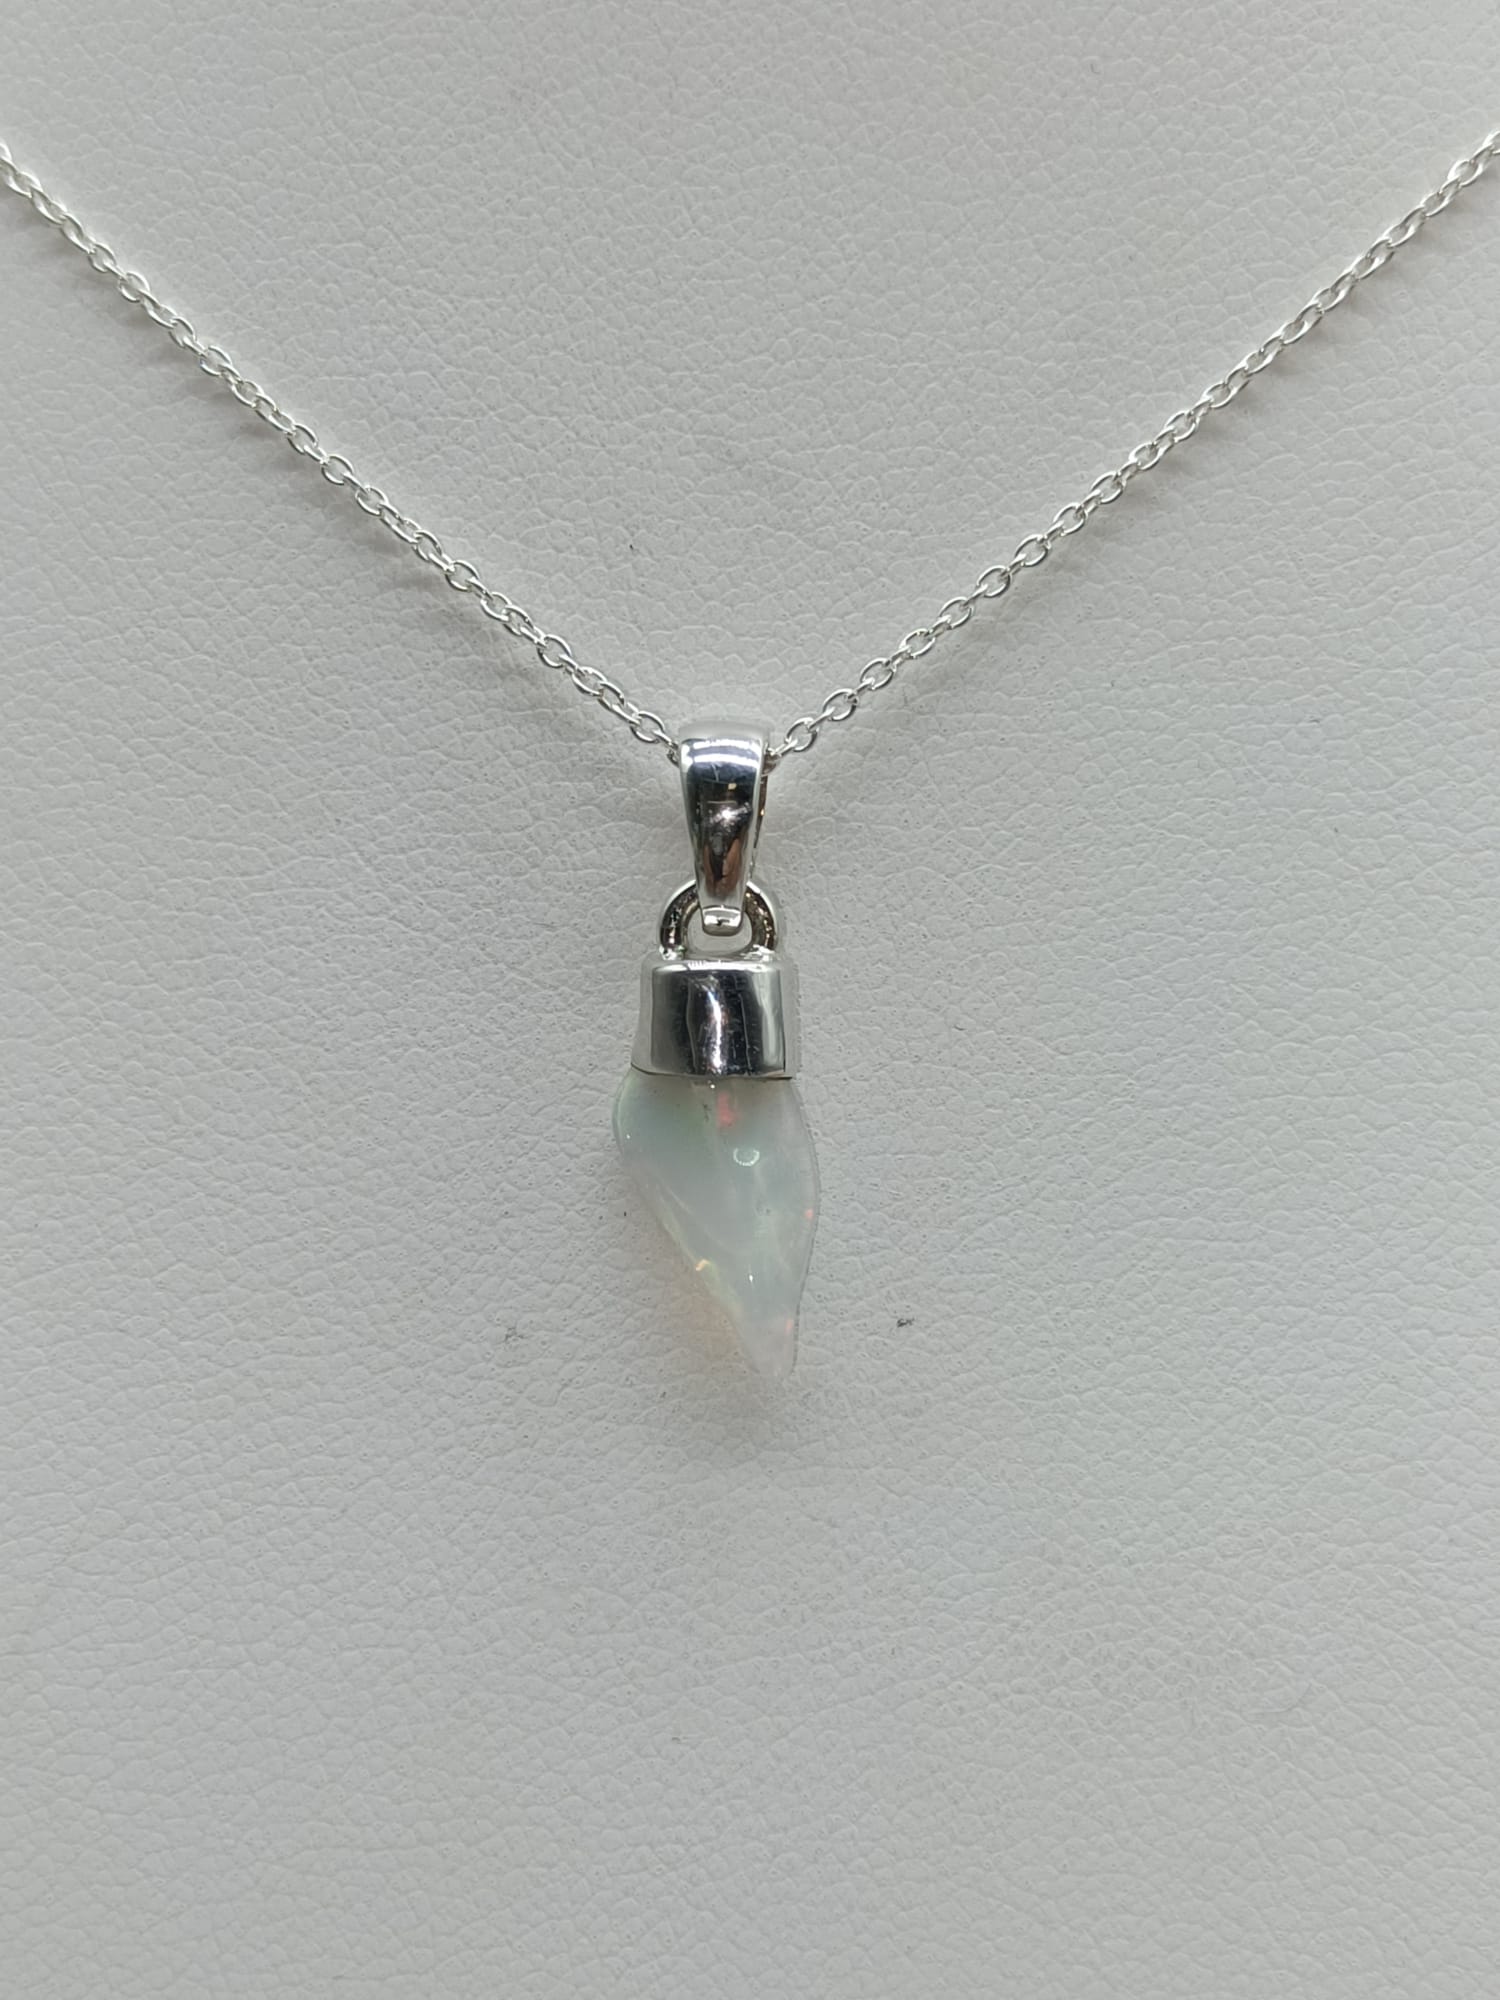 Ethiopian Opal 925 Sterling Silver Pendant 11x6mm (Silver Chain Included)
